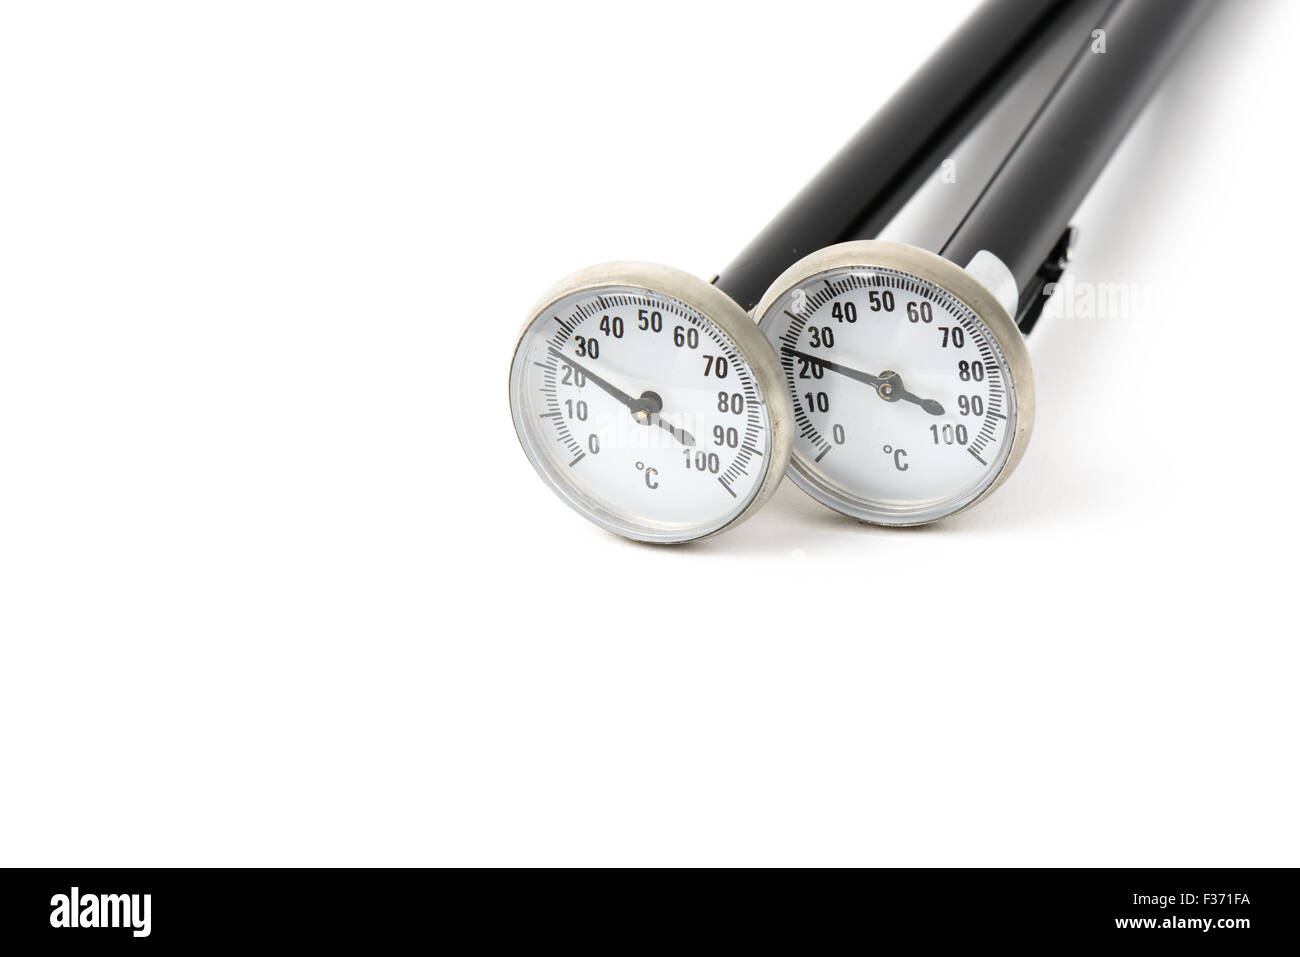 close-up of cooking thermometer and gauge, isolated on white Stock Photo